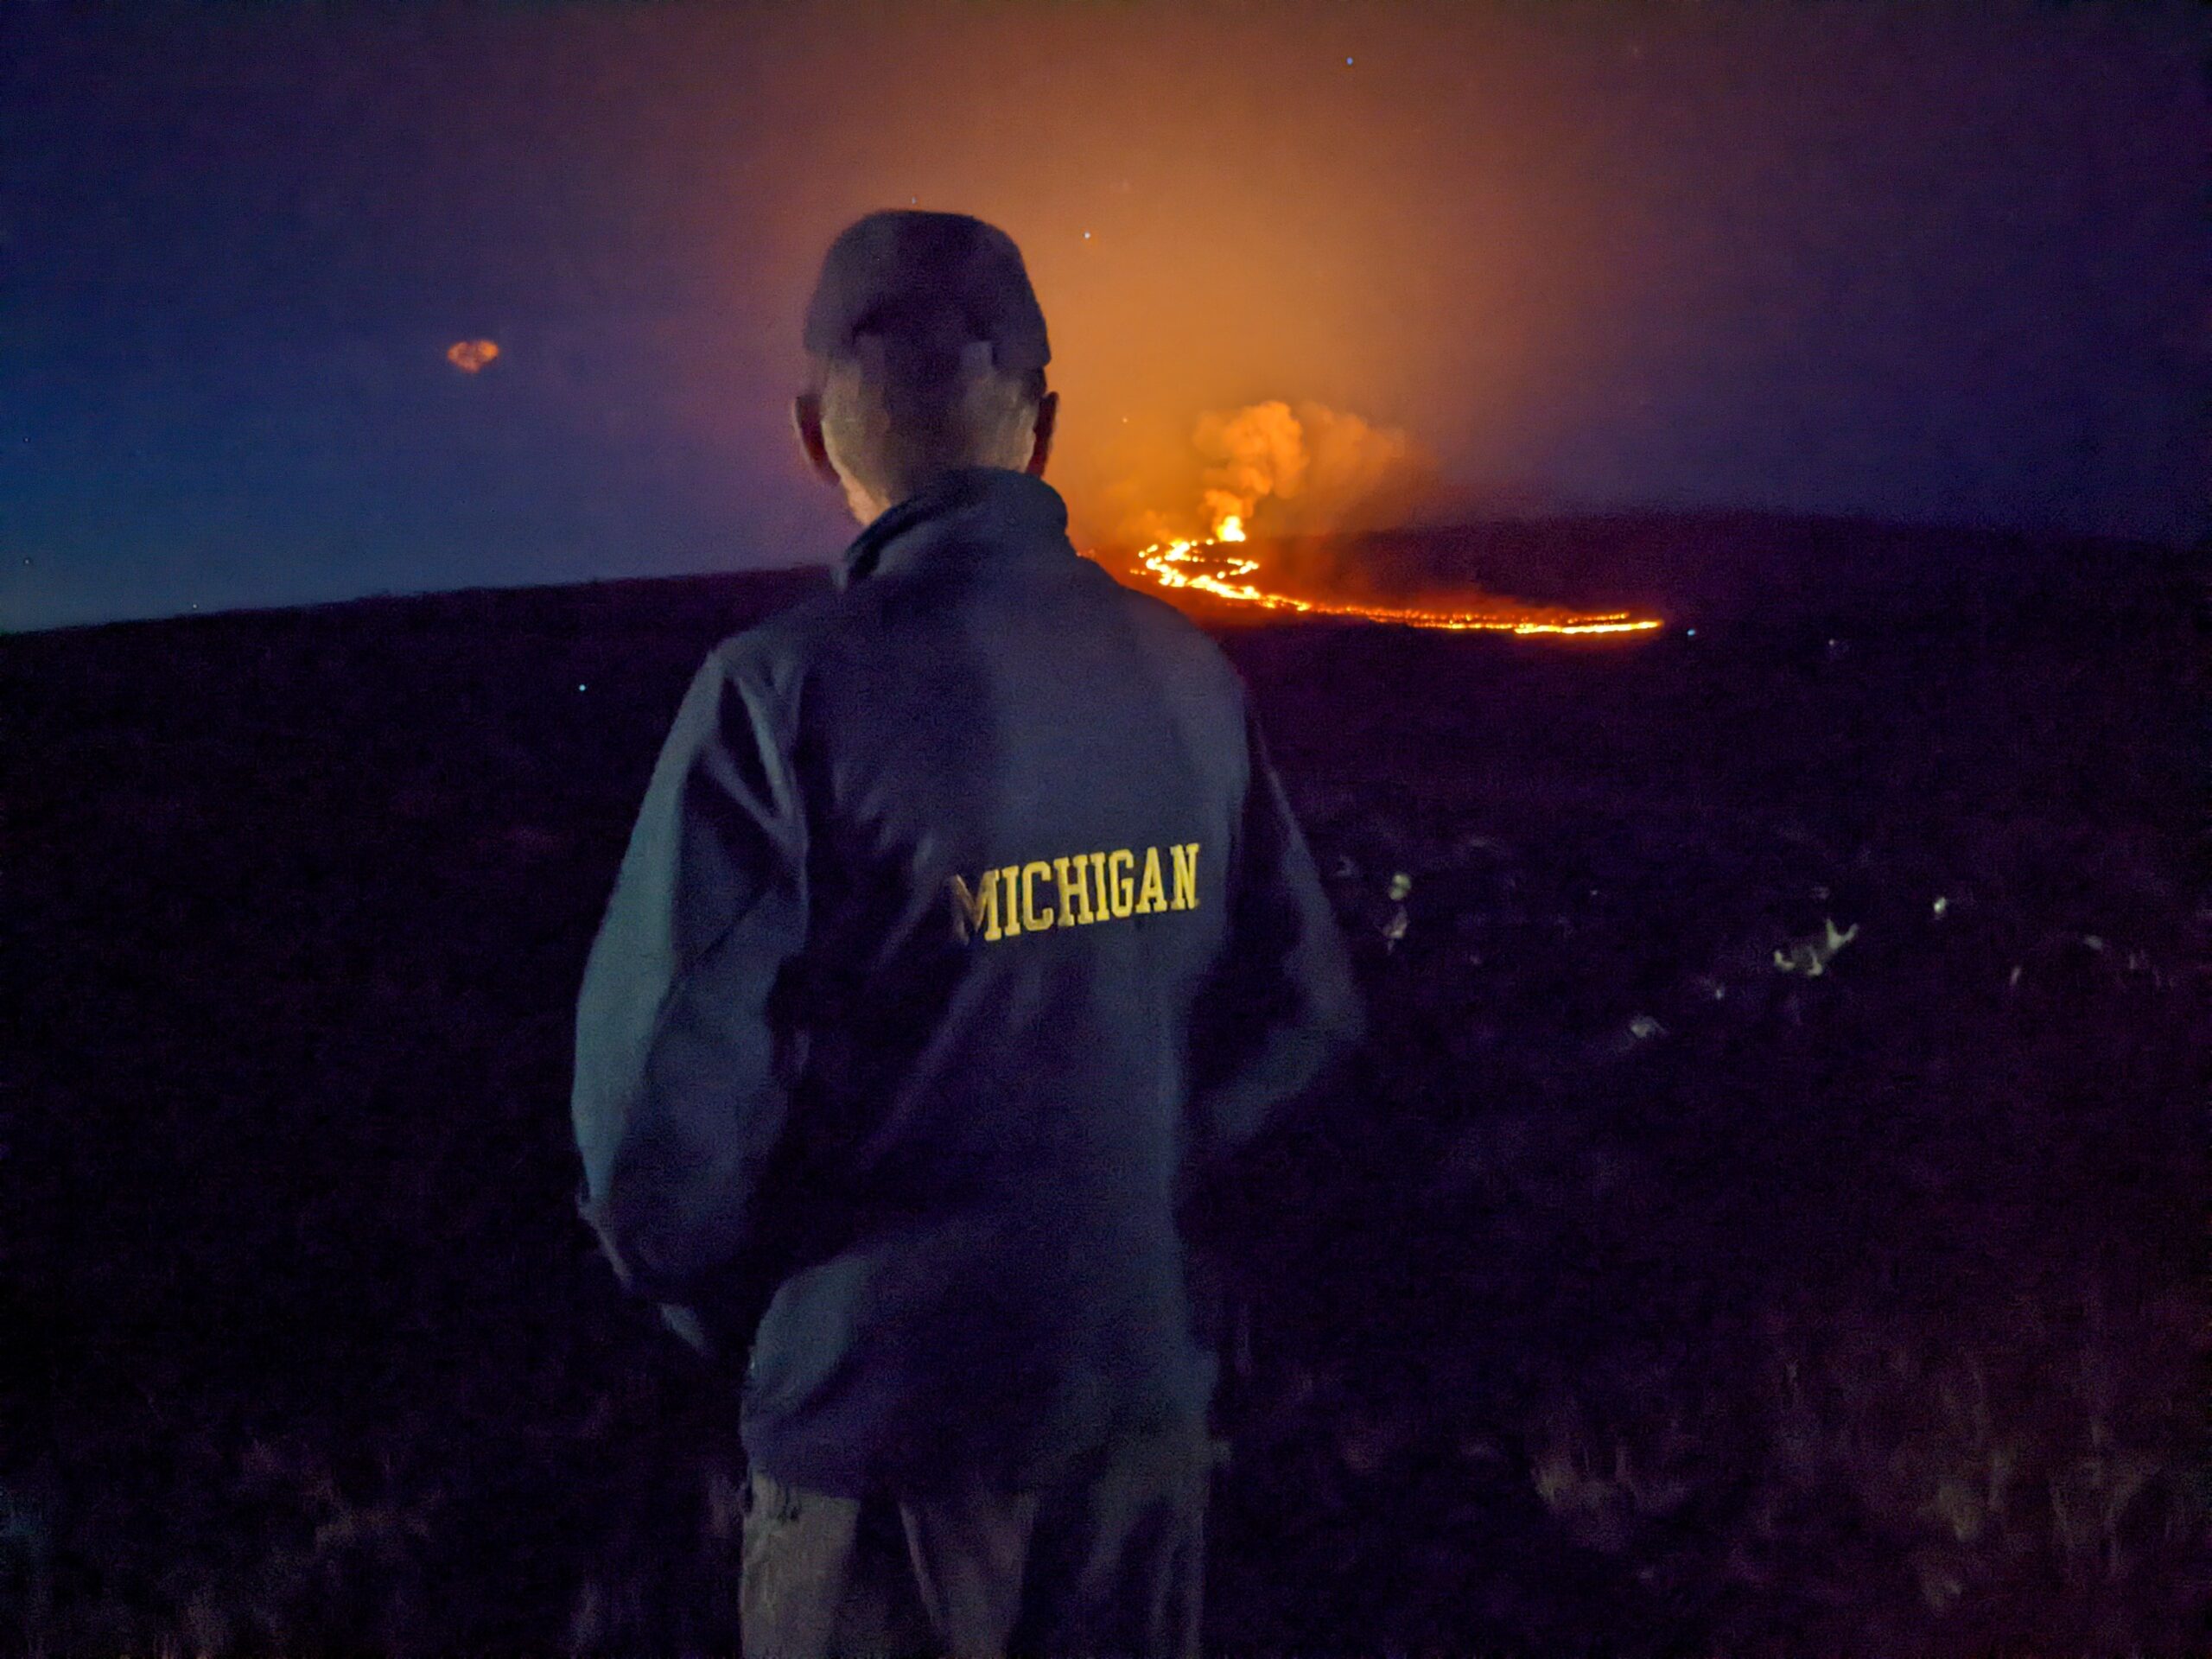 Bud Quitiquit, JD’72, observes the power of the Mauna Loa volcano as it erupts on the island of Hawaii.